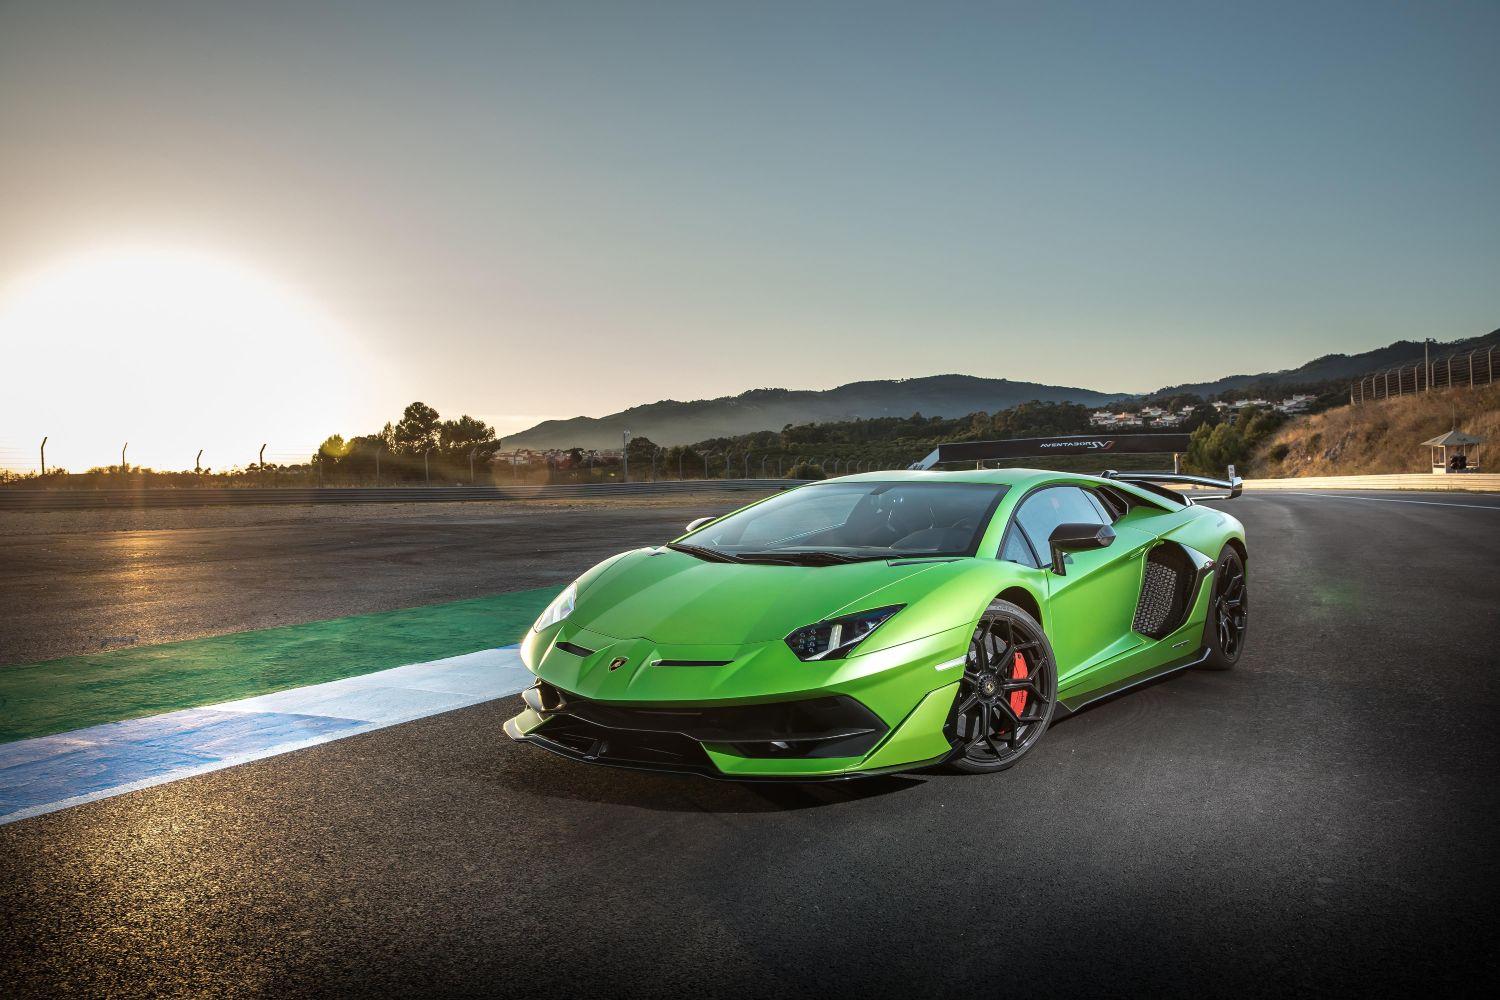 The Lamborghini Aventador is among the more lavish cars out there. But as one buyer showed, it can be made to look even fancier.